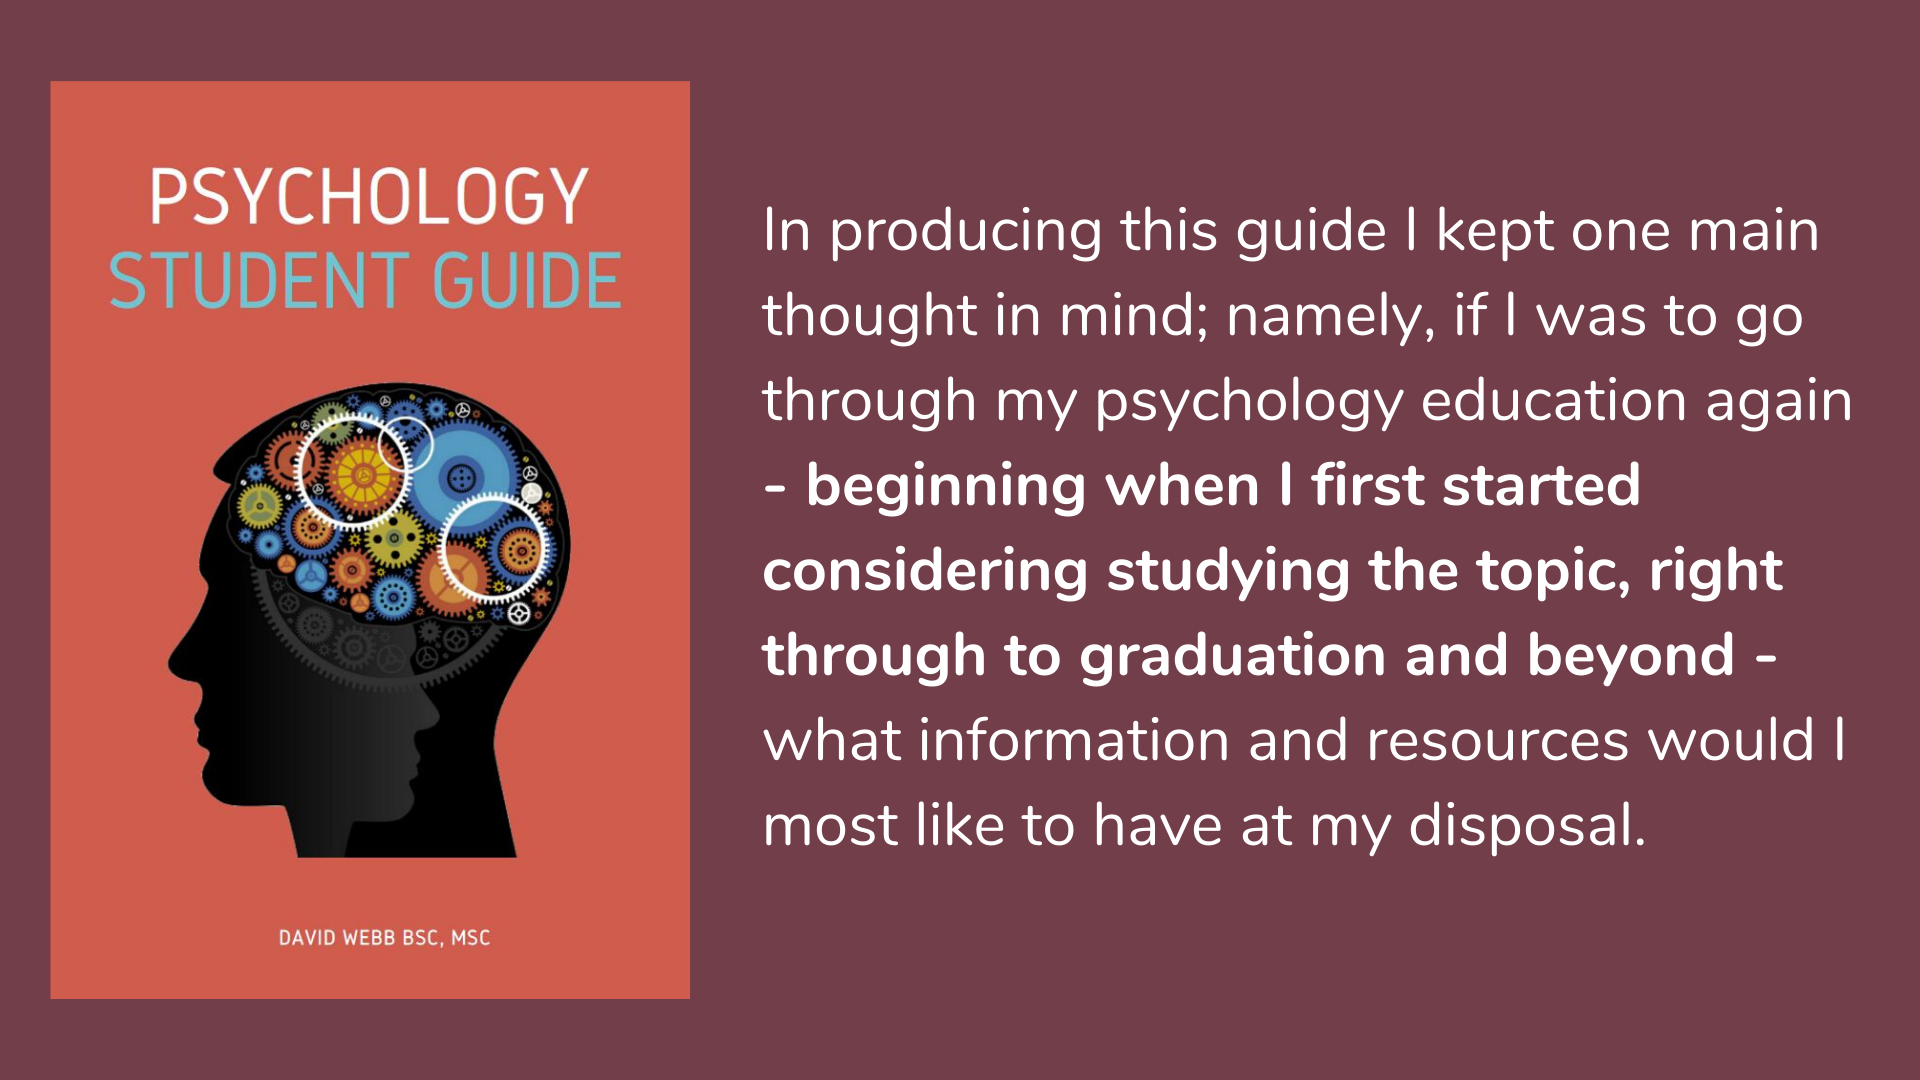 Psychology Student Guide. Book cover and description.